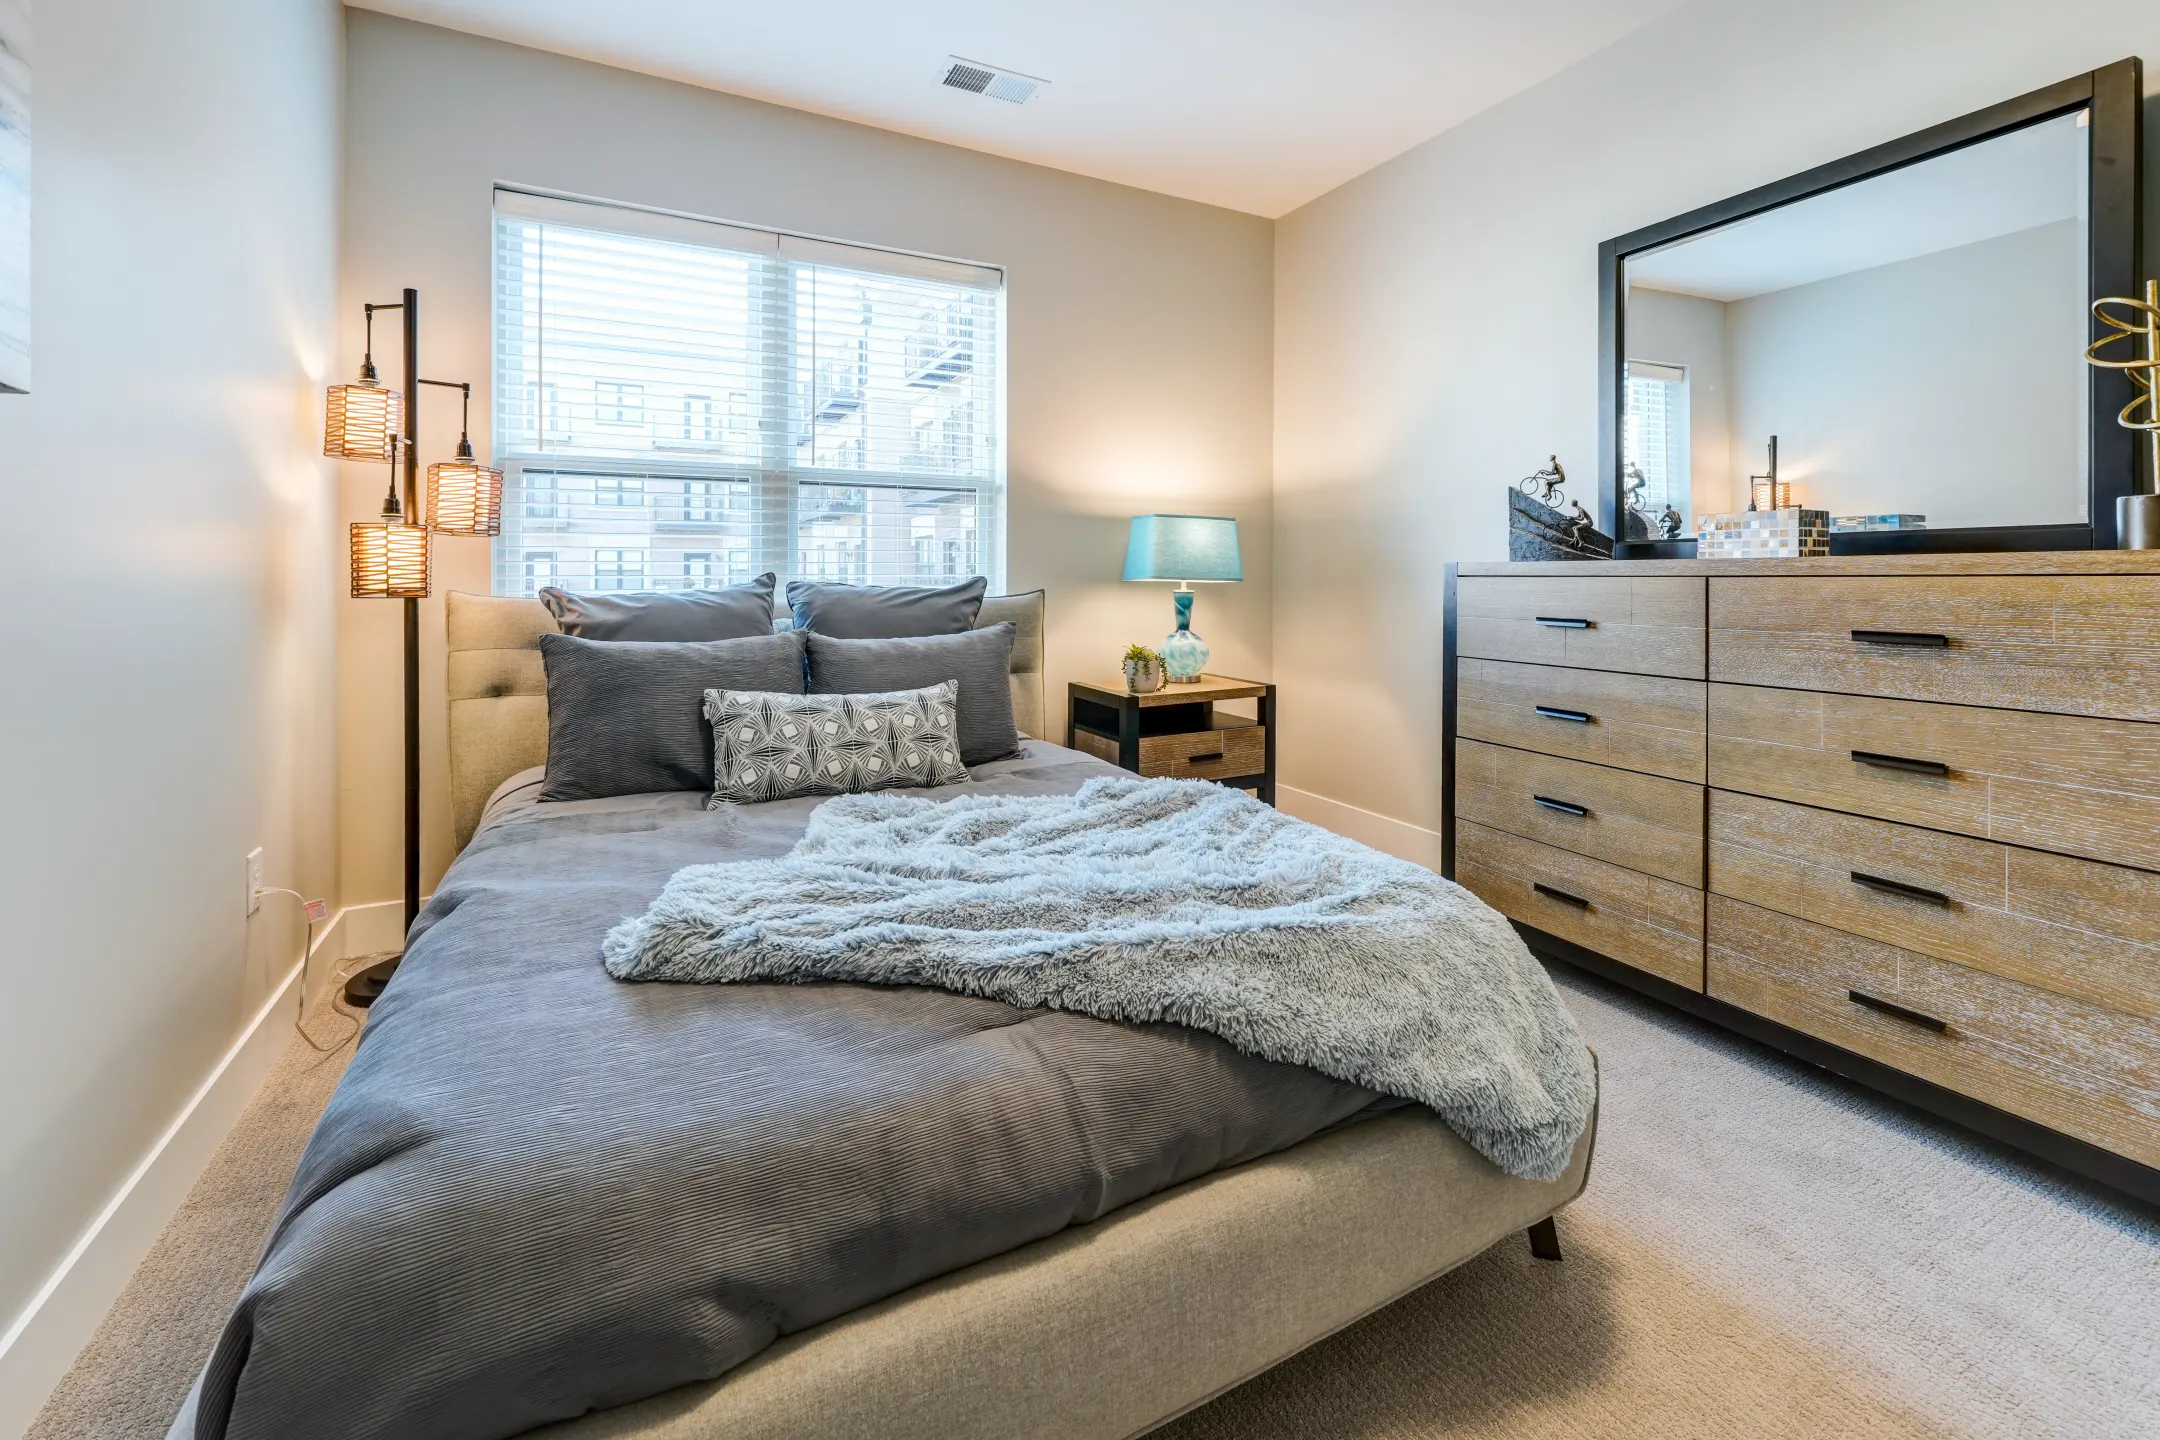 Bedroom - The Residences at The Playfair - Carmel, IN